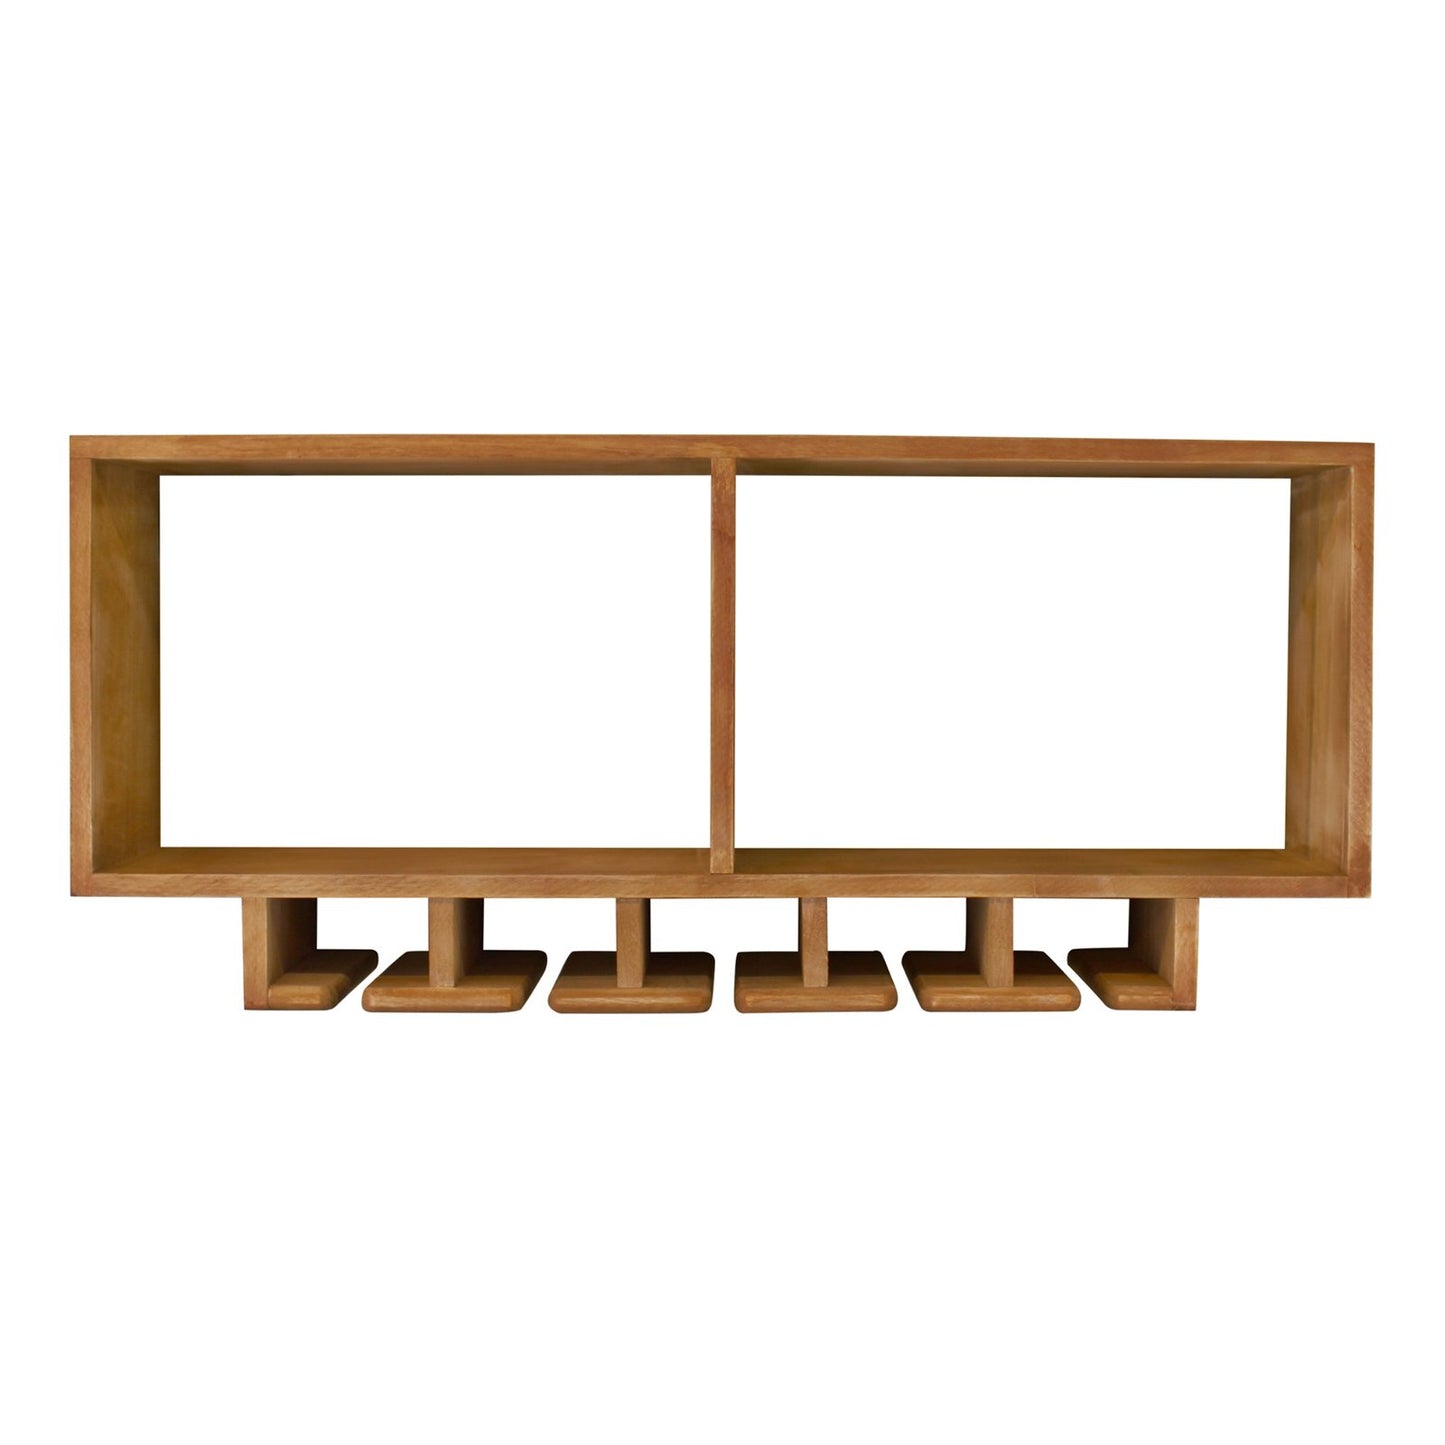 Kitchen Shelving Unit With Storage For Wine Glasses - Kaftan direct